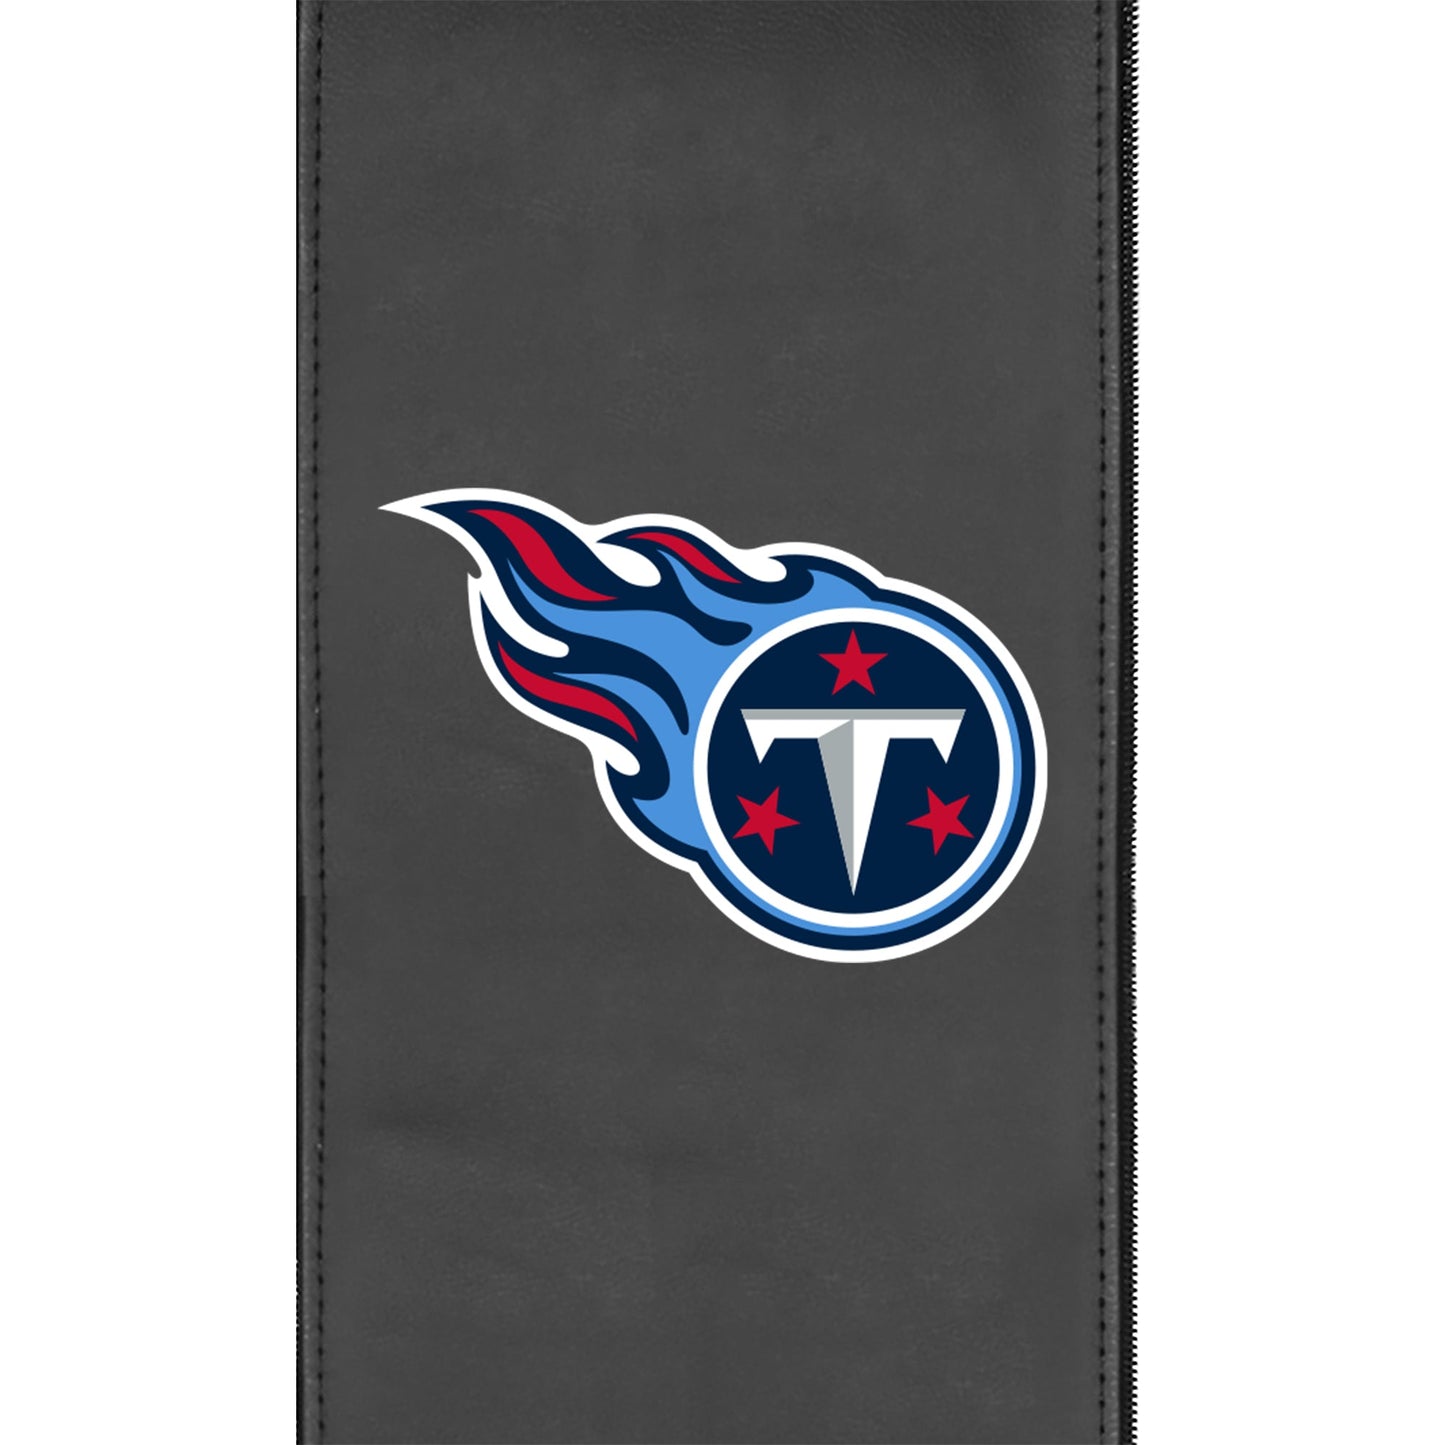 Silver Loveseat with  Tennessee Titans Primary Logo